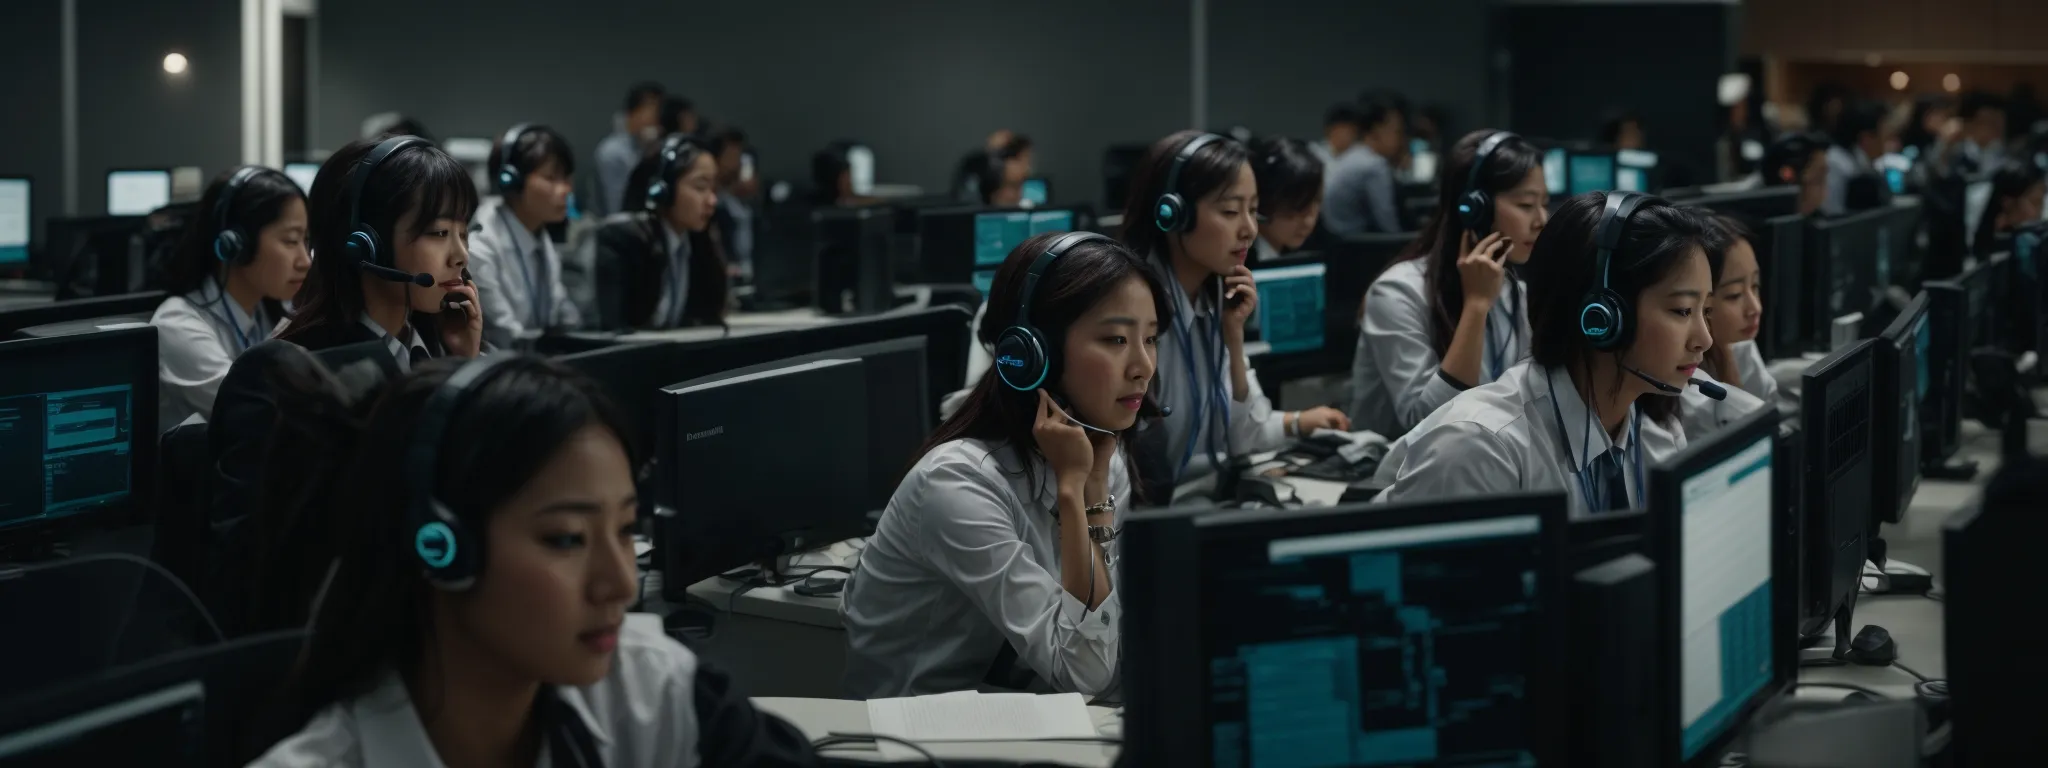 a line of customer service representatives with headsets engaged in calls, surrounded by multiple computer screens displaying call data analytics.